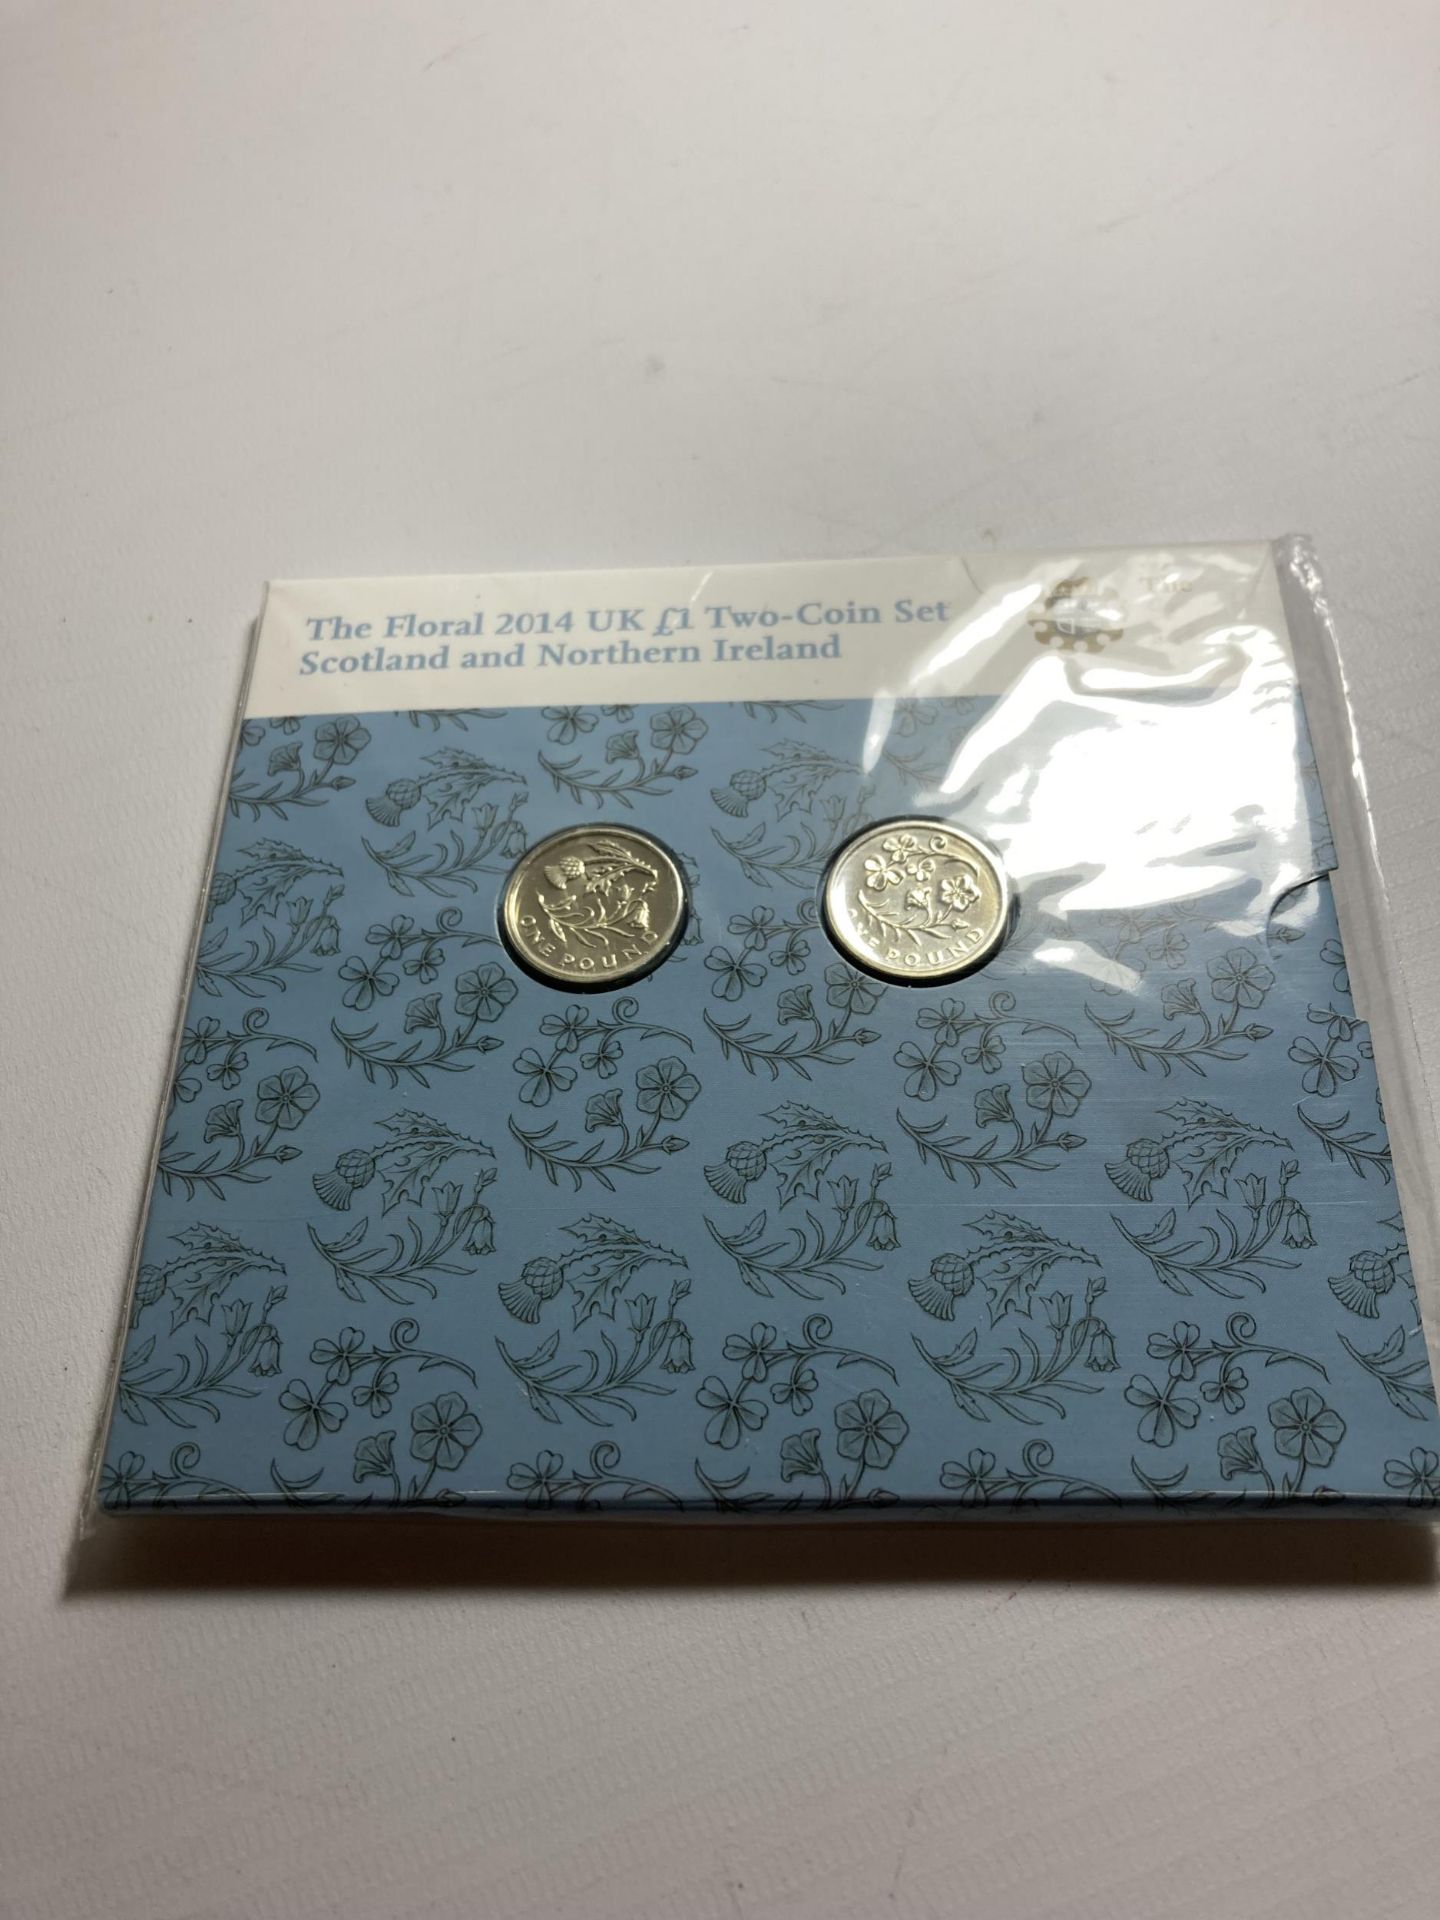 THE ROYAL MINT THE FLORAL 2014 UK £1 TWO COIN SETS SCOTLAND AND NORTHERN IRELAND